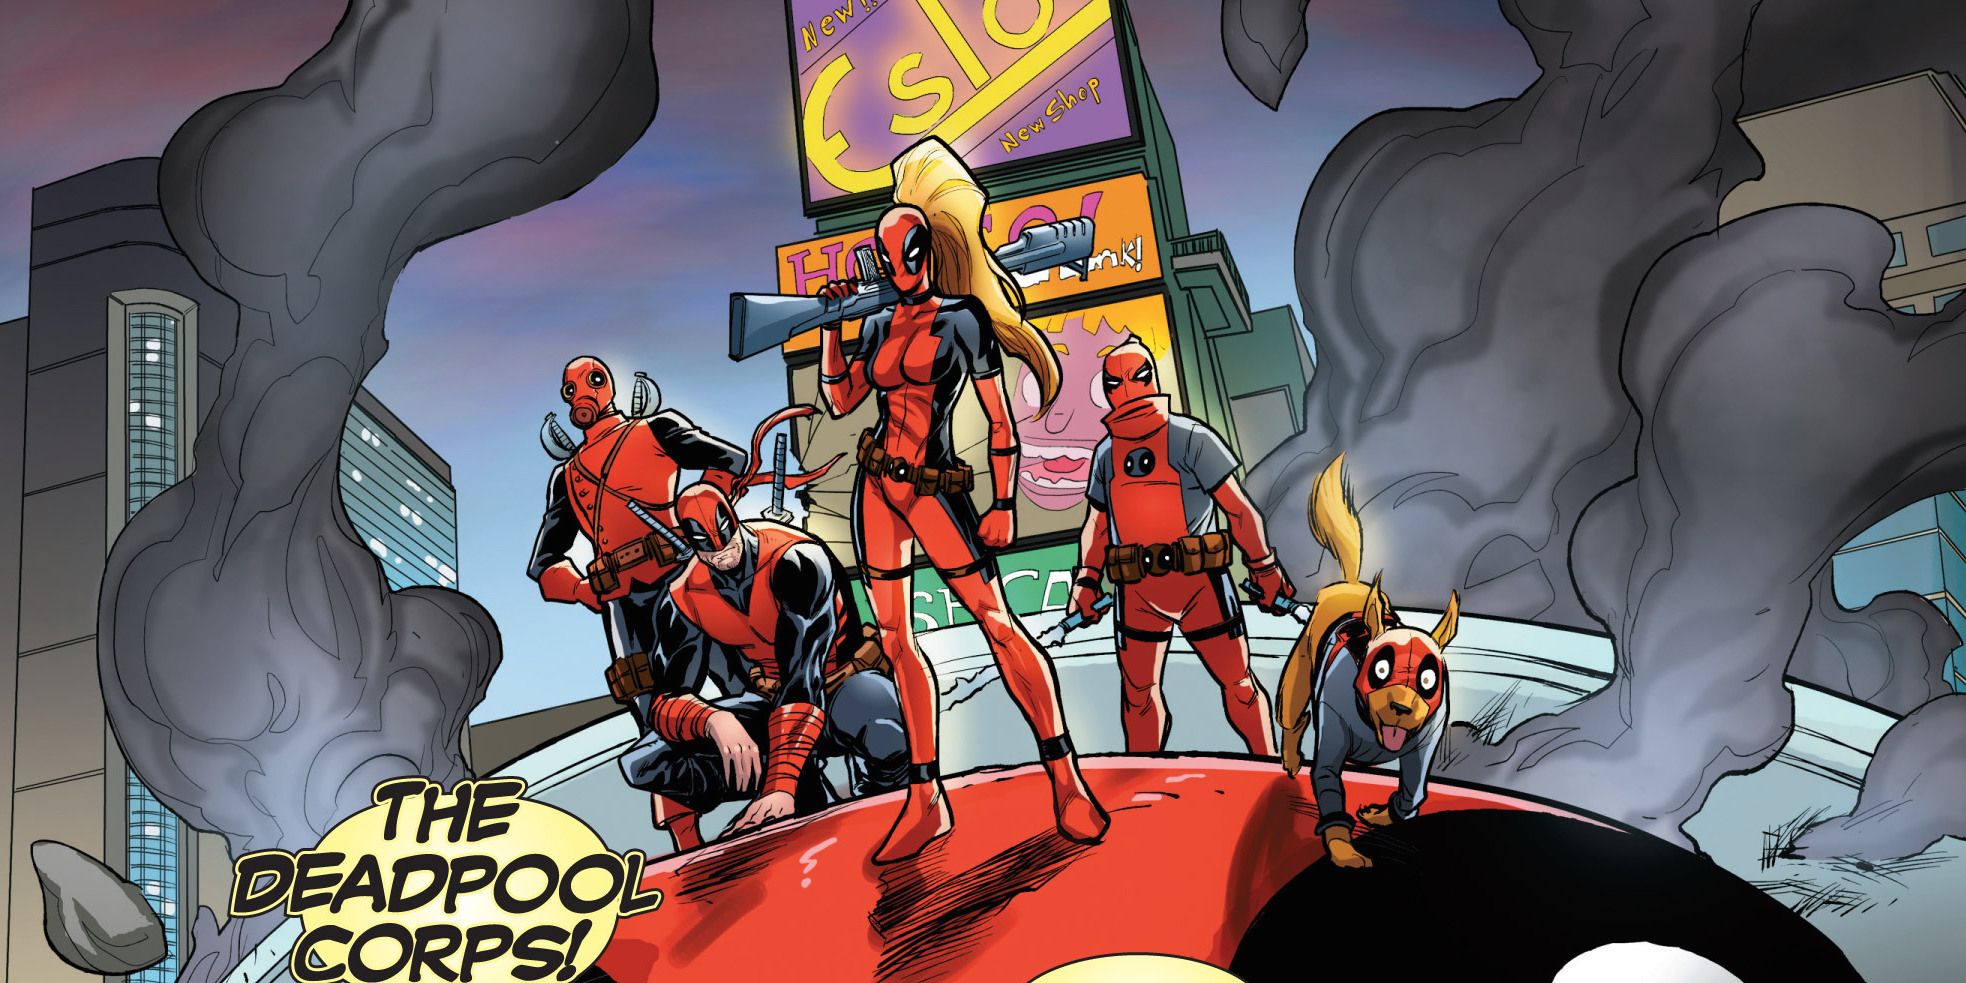 The Deadpool Corps from Marvel Comics